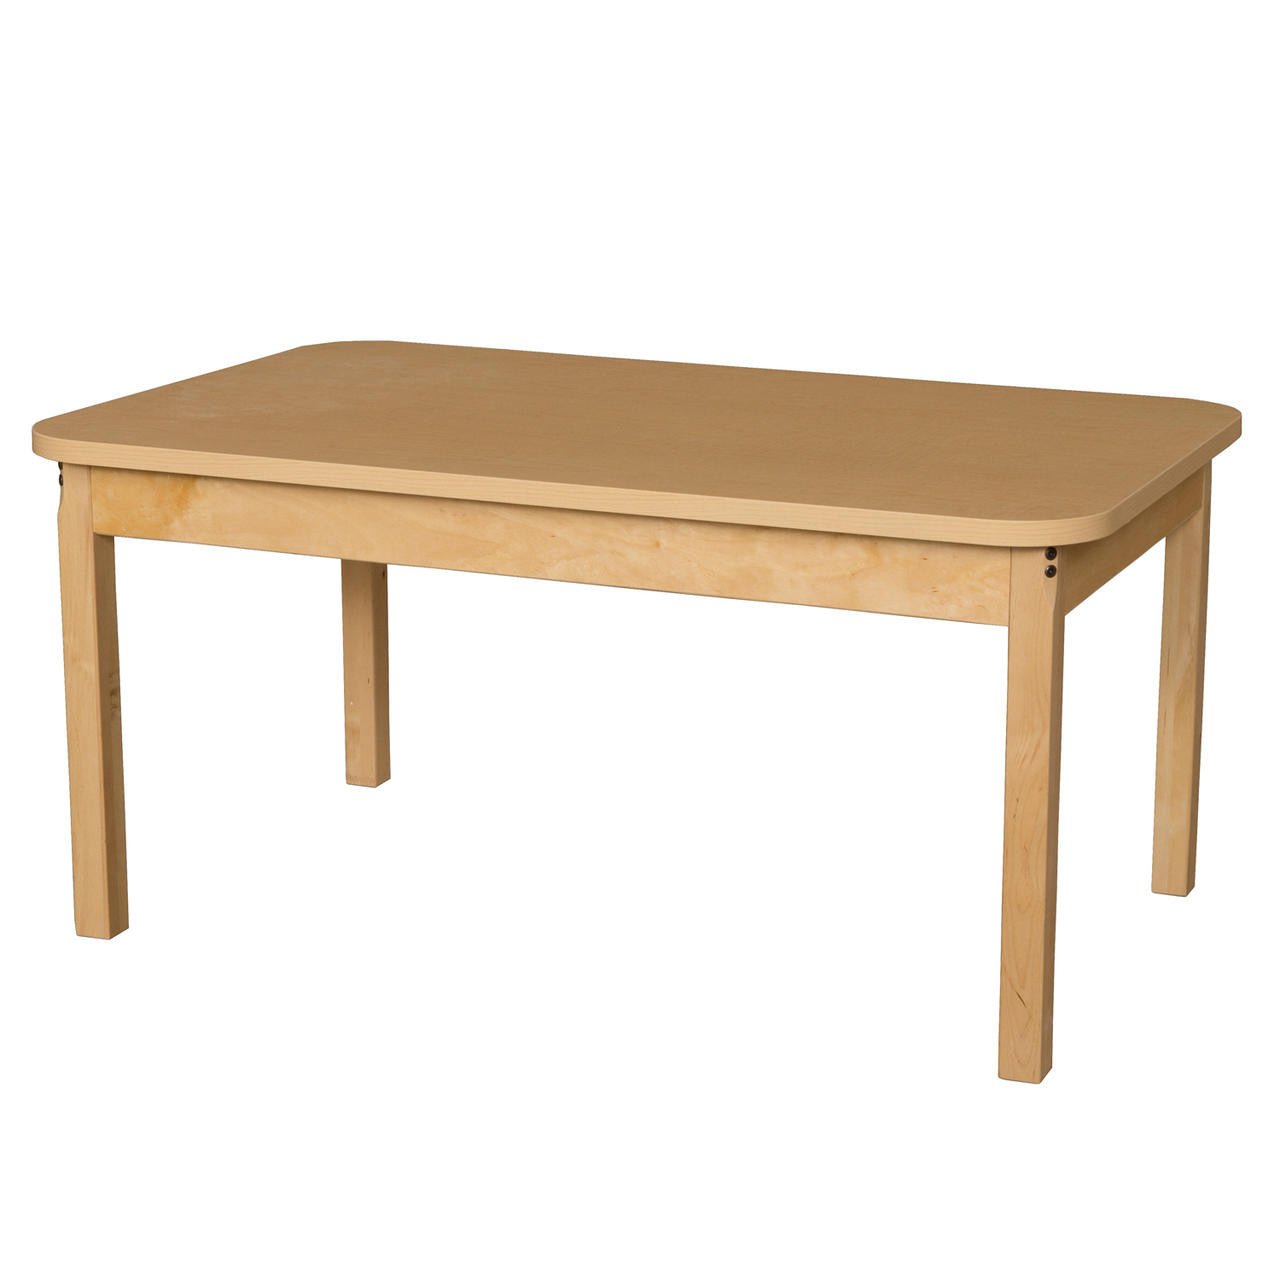 Rectangle High Pressure Laminate Table with Hardwood Legs- 22